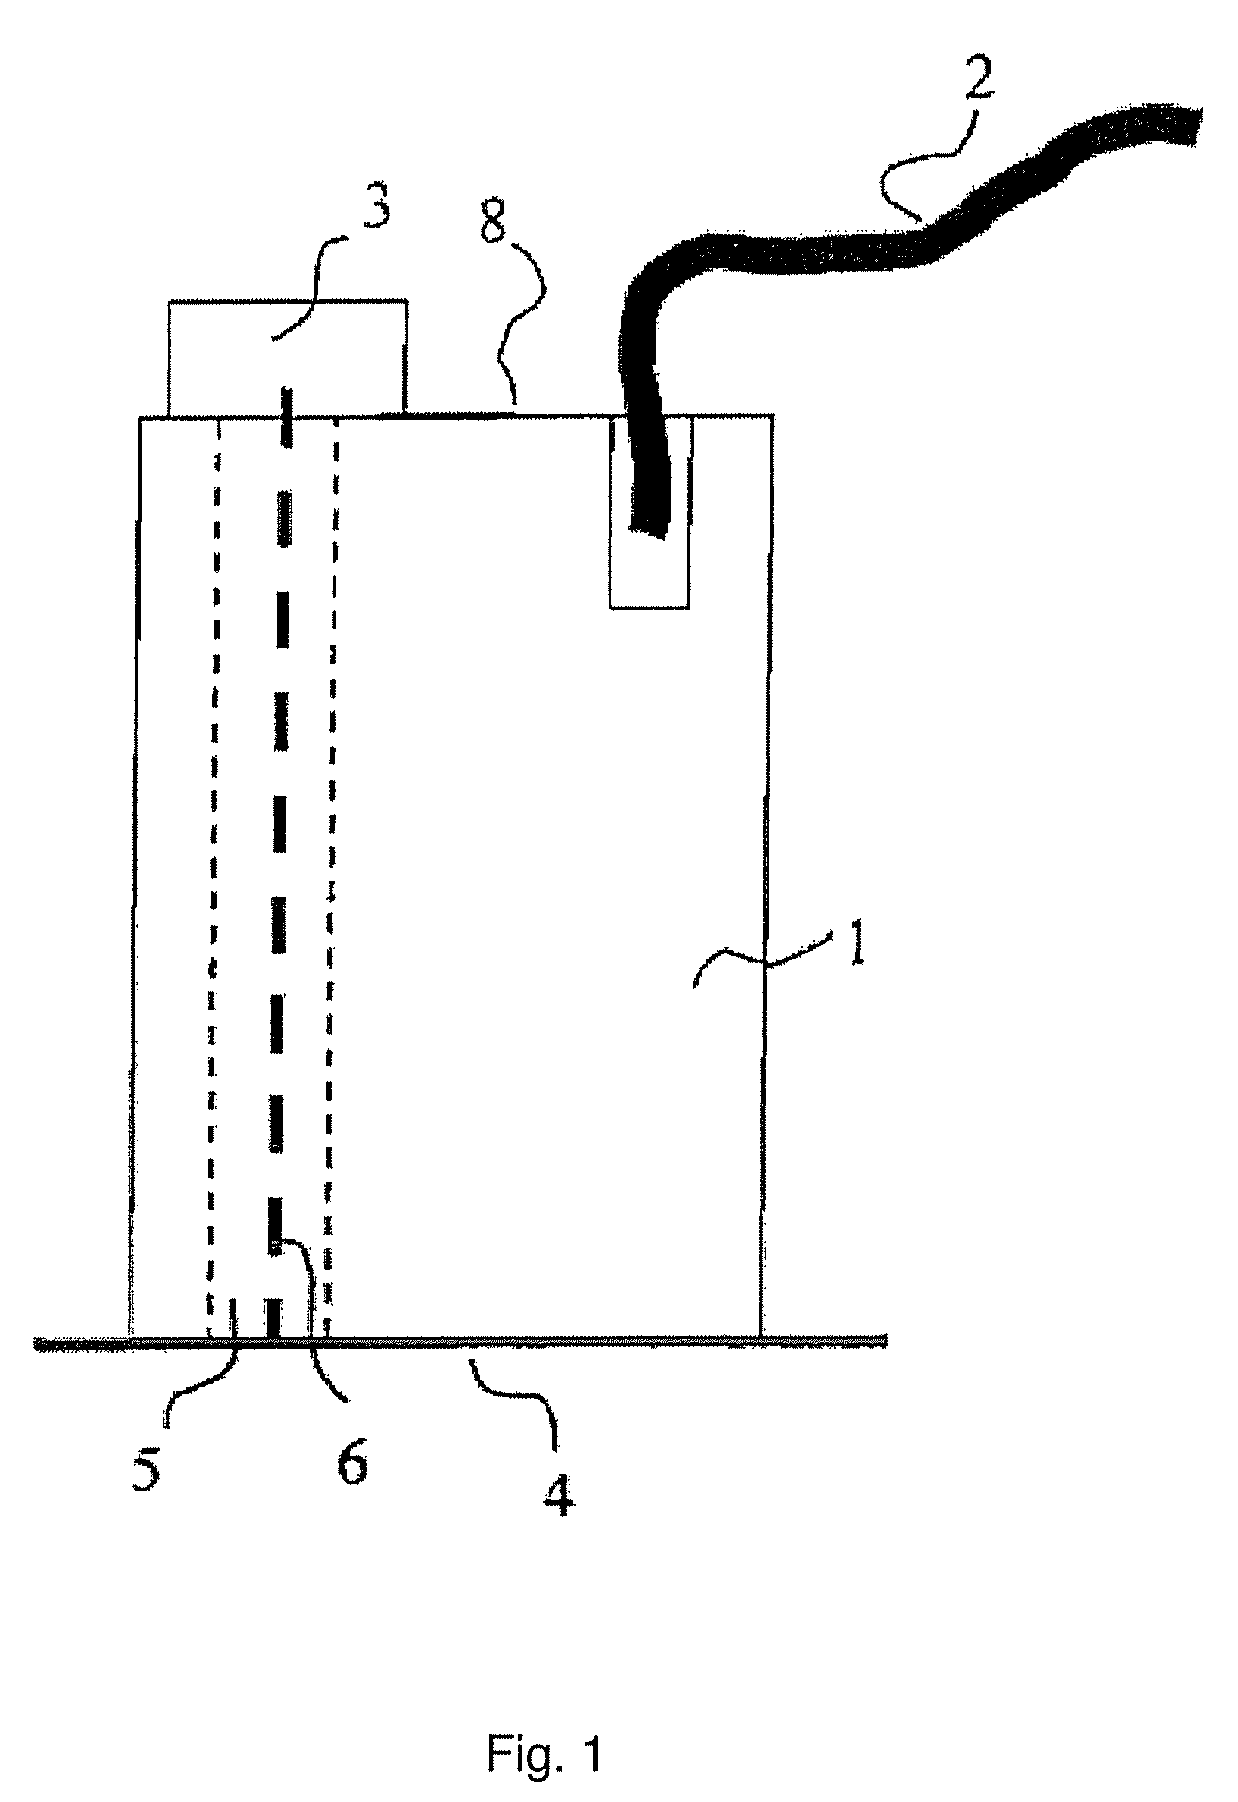 Apparatus for monitoring of brushes, in particular slipring or commutator brushes, on electrical machines